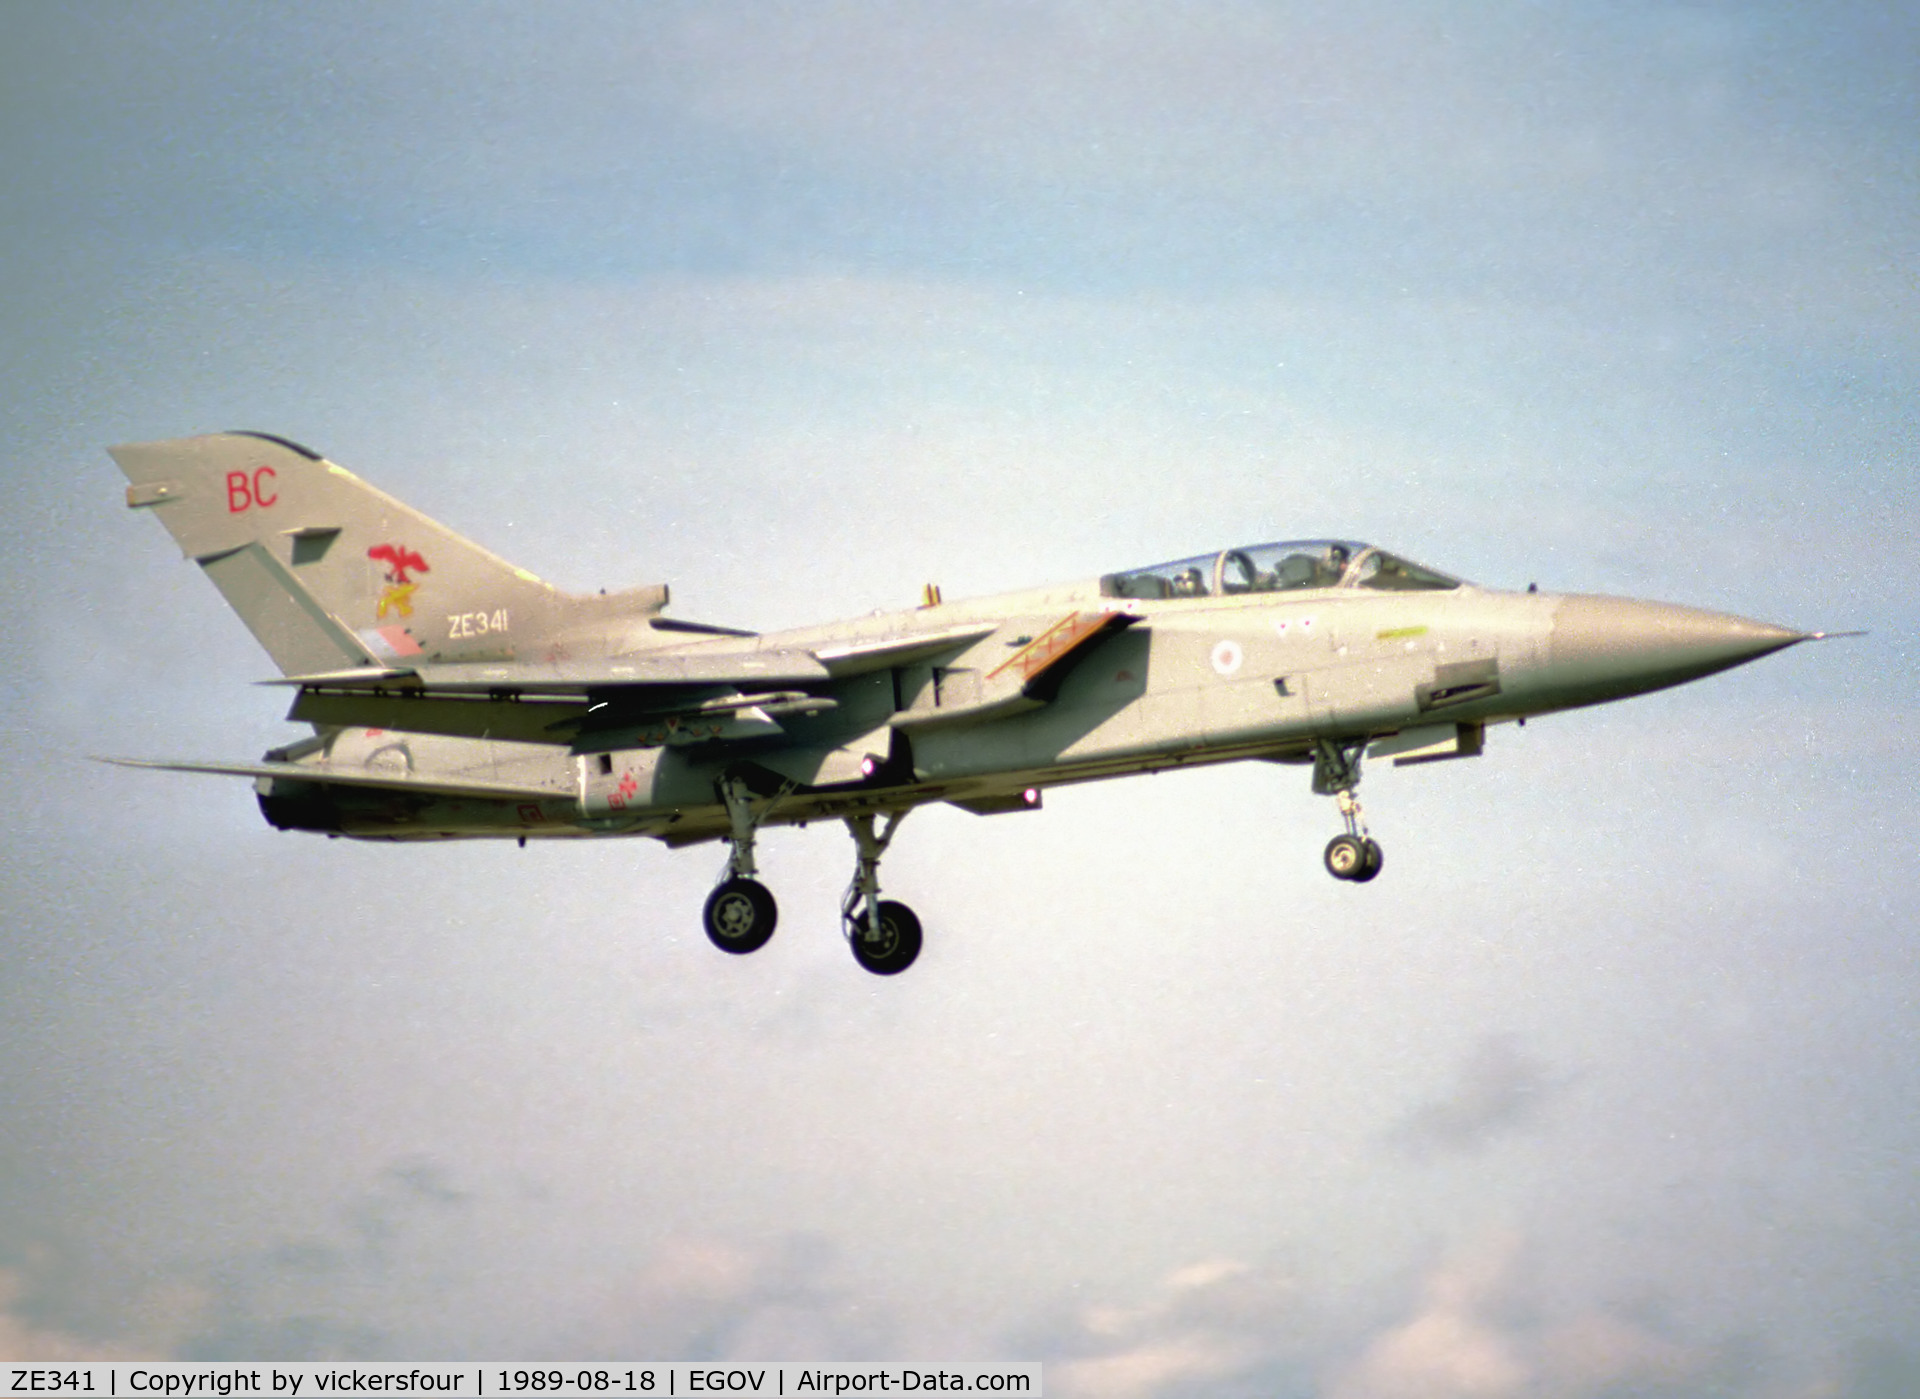 ZE341, 1987 Panavia Tornado F.3 C/N AS043/645/3287, Royal Air Force Tornado F3. Operated by 29 Squadron, coded 'BC'.